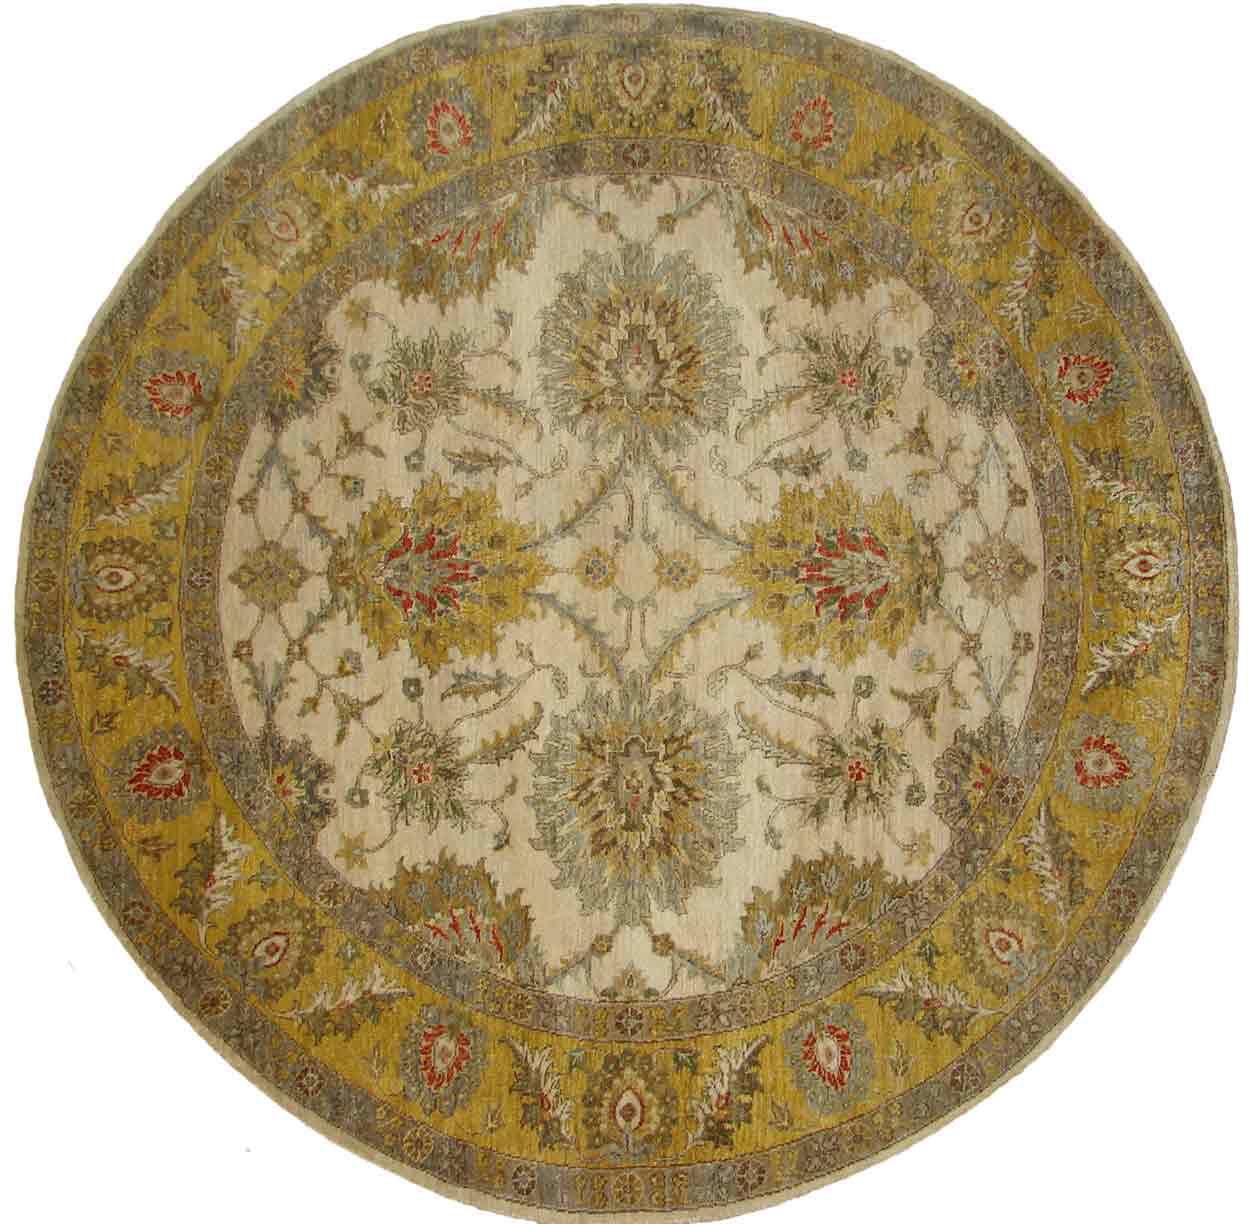 Round, Octagon & Square Rugs SULTAN 18605 Ivory - Beige & Lt. Gold - Gold Hand Knotted Rug